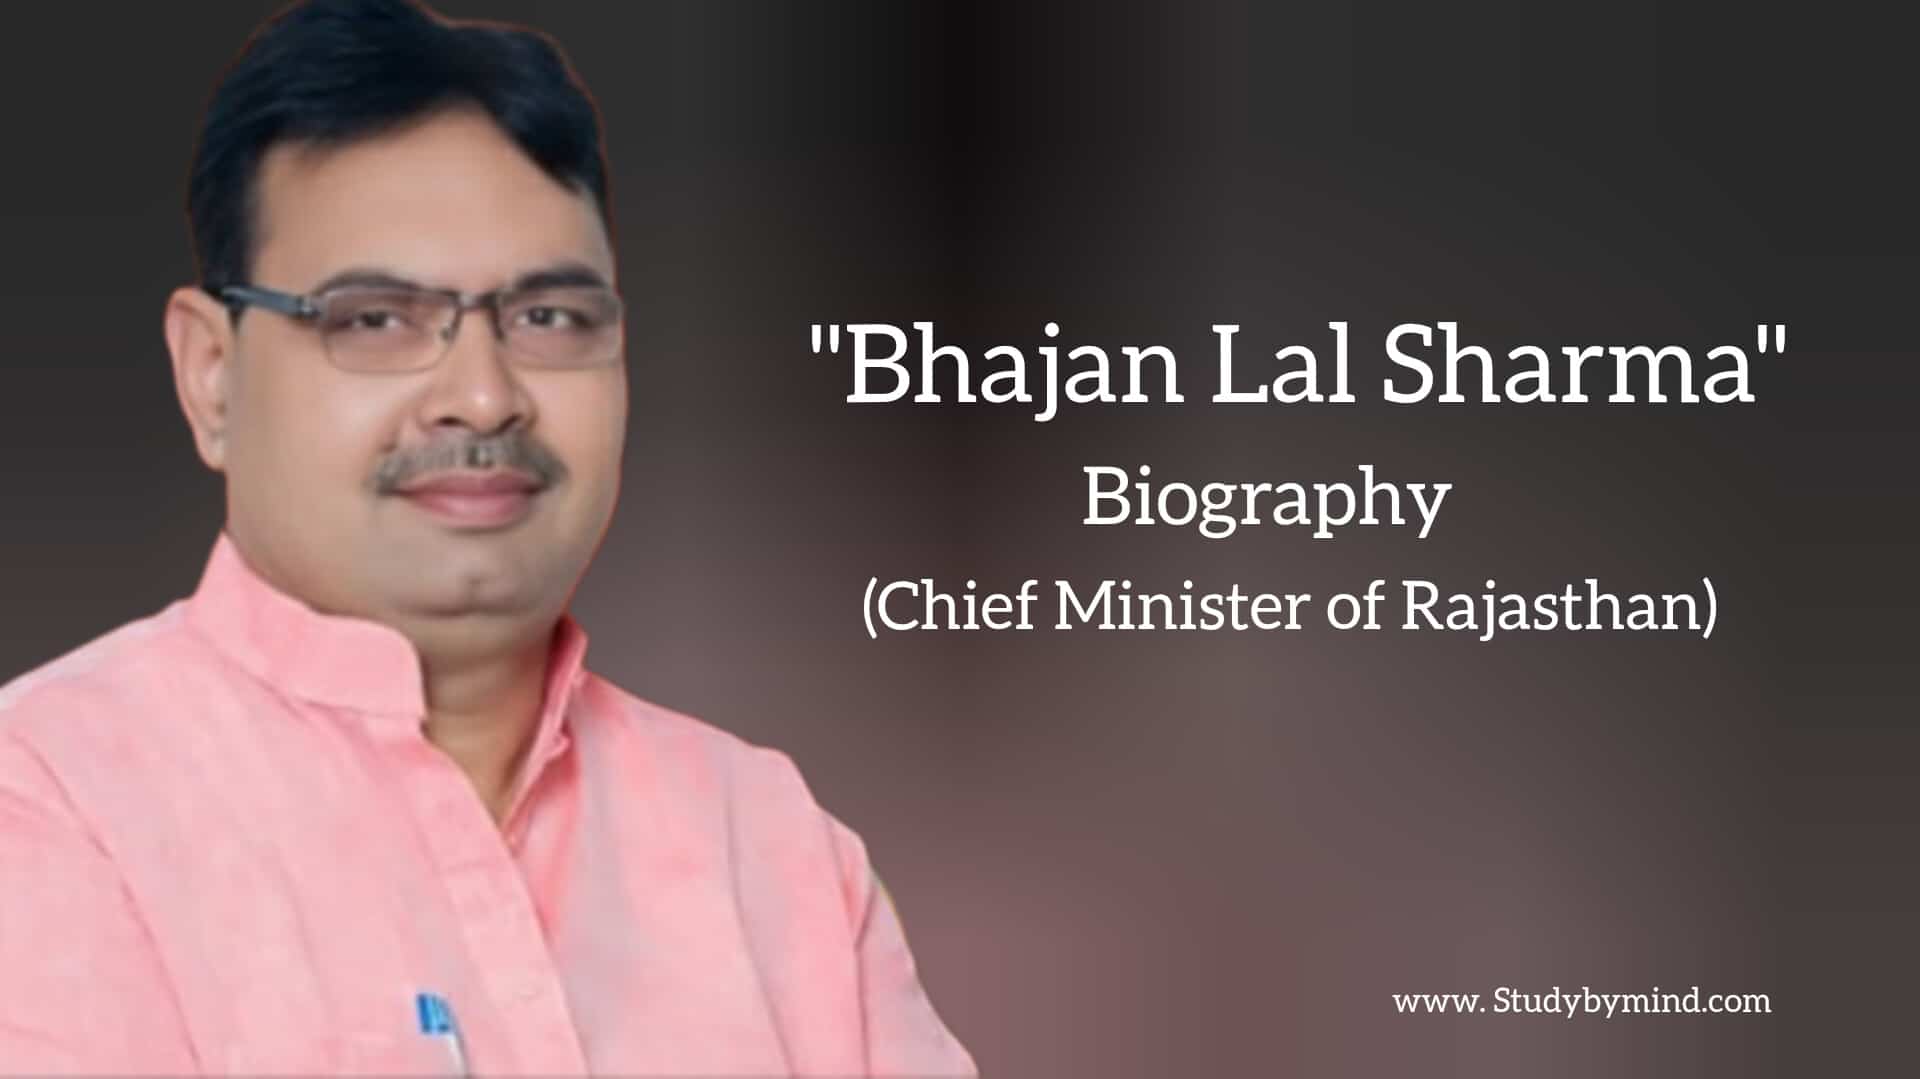 You are currently viewing Bhajan Lal Sharma Biography in english (Chief Minister of Rajasthan)